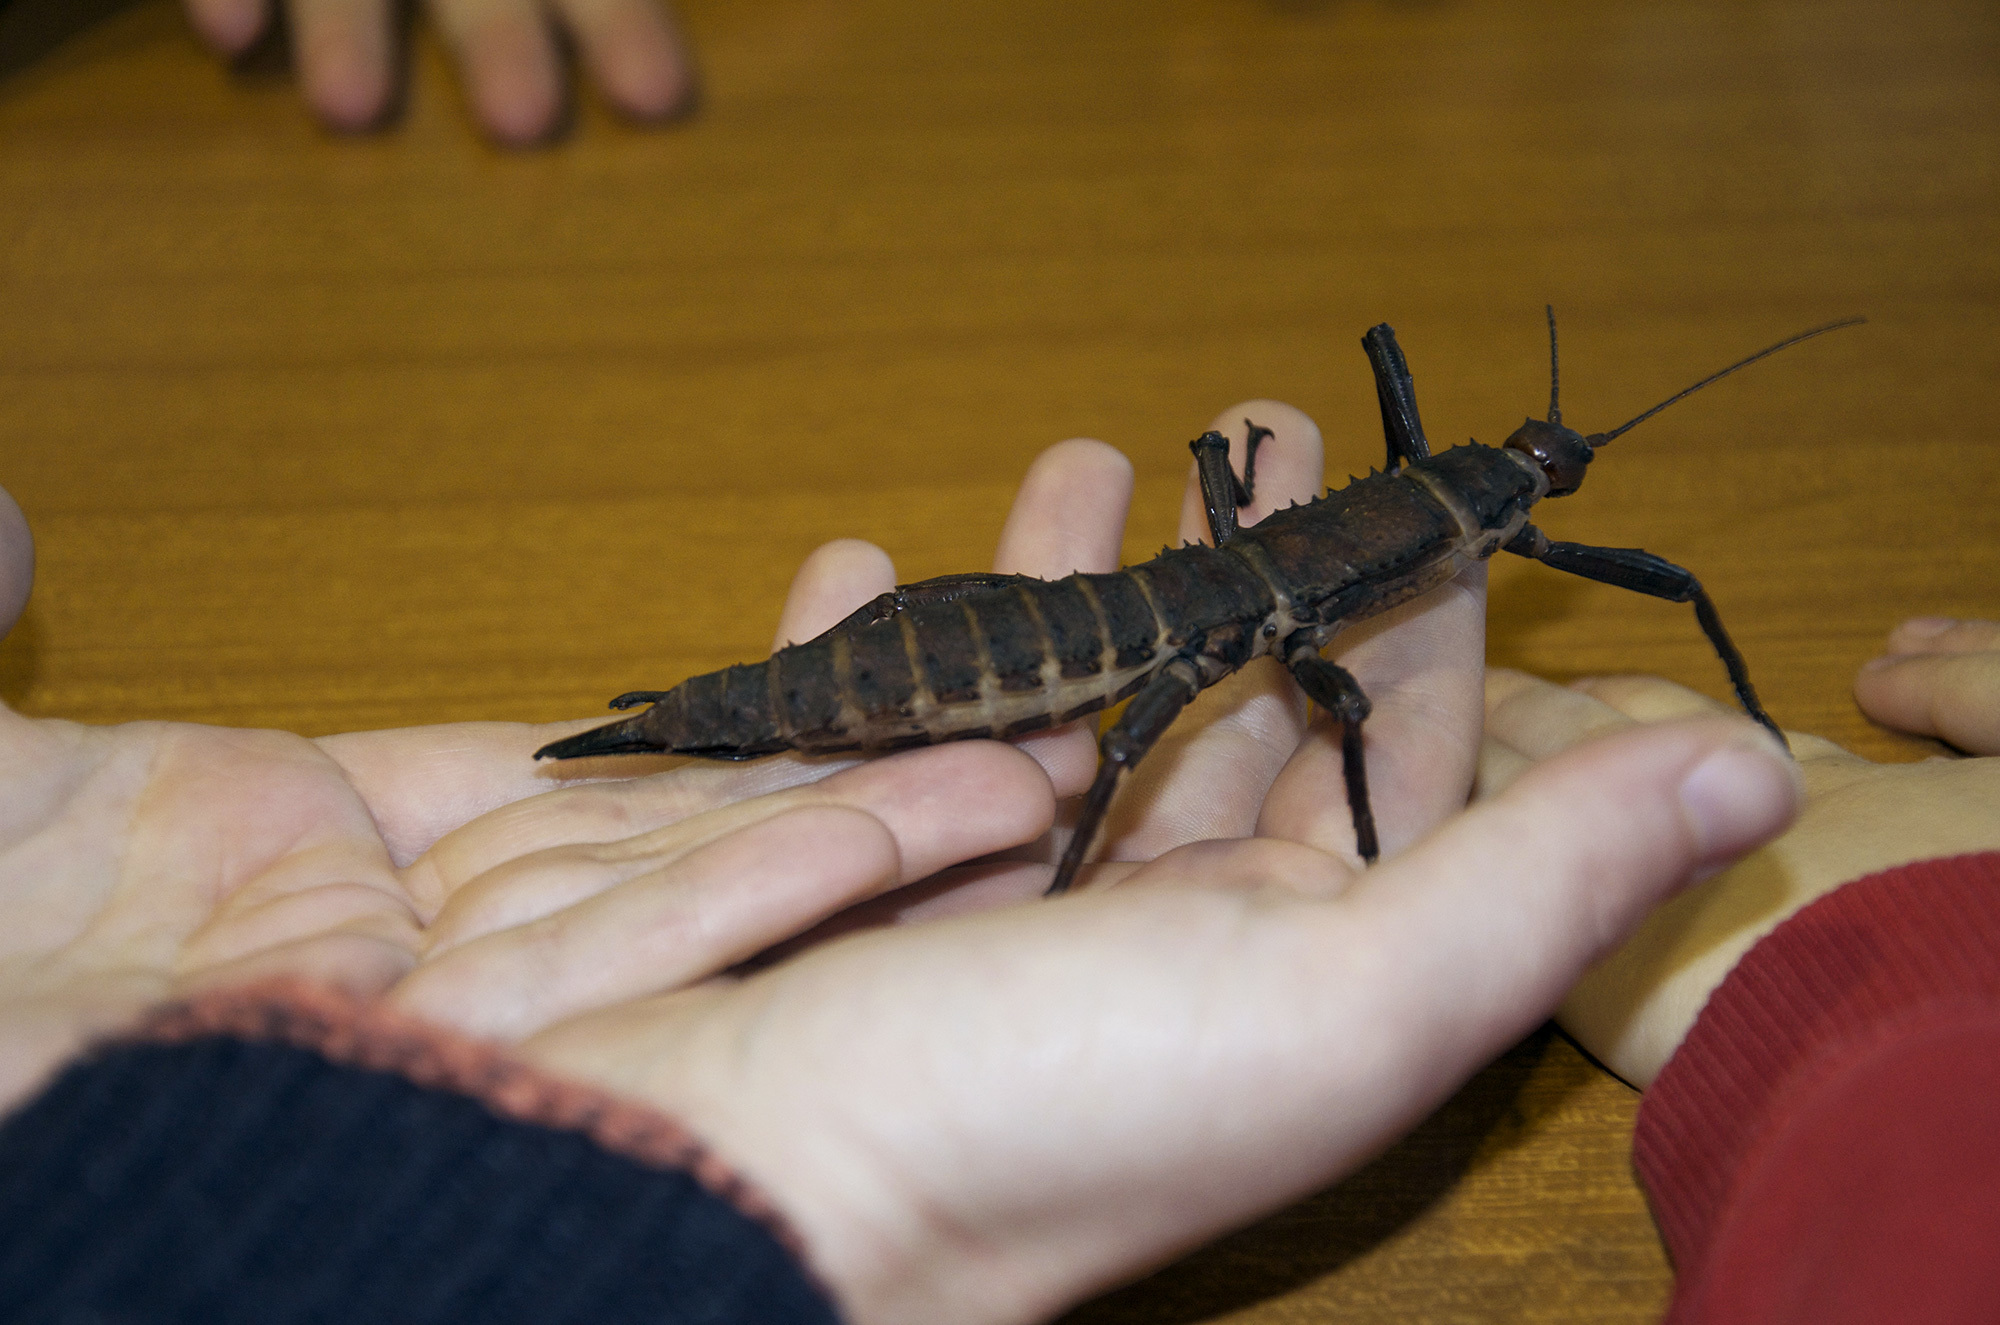 New Guinea Spiny Stick Insect (Eurycantha calcarata) · iNaturalist